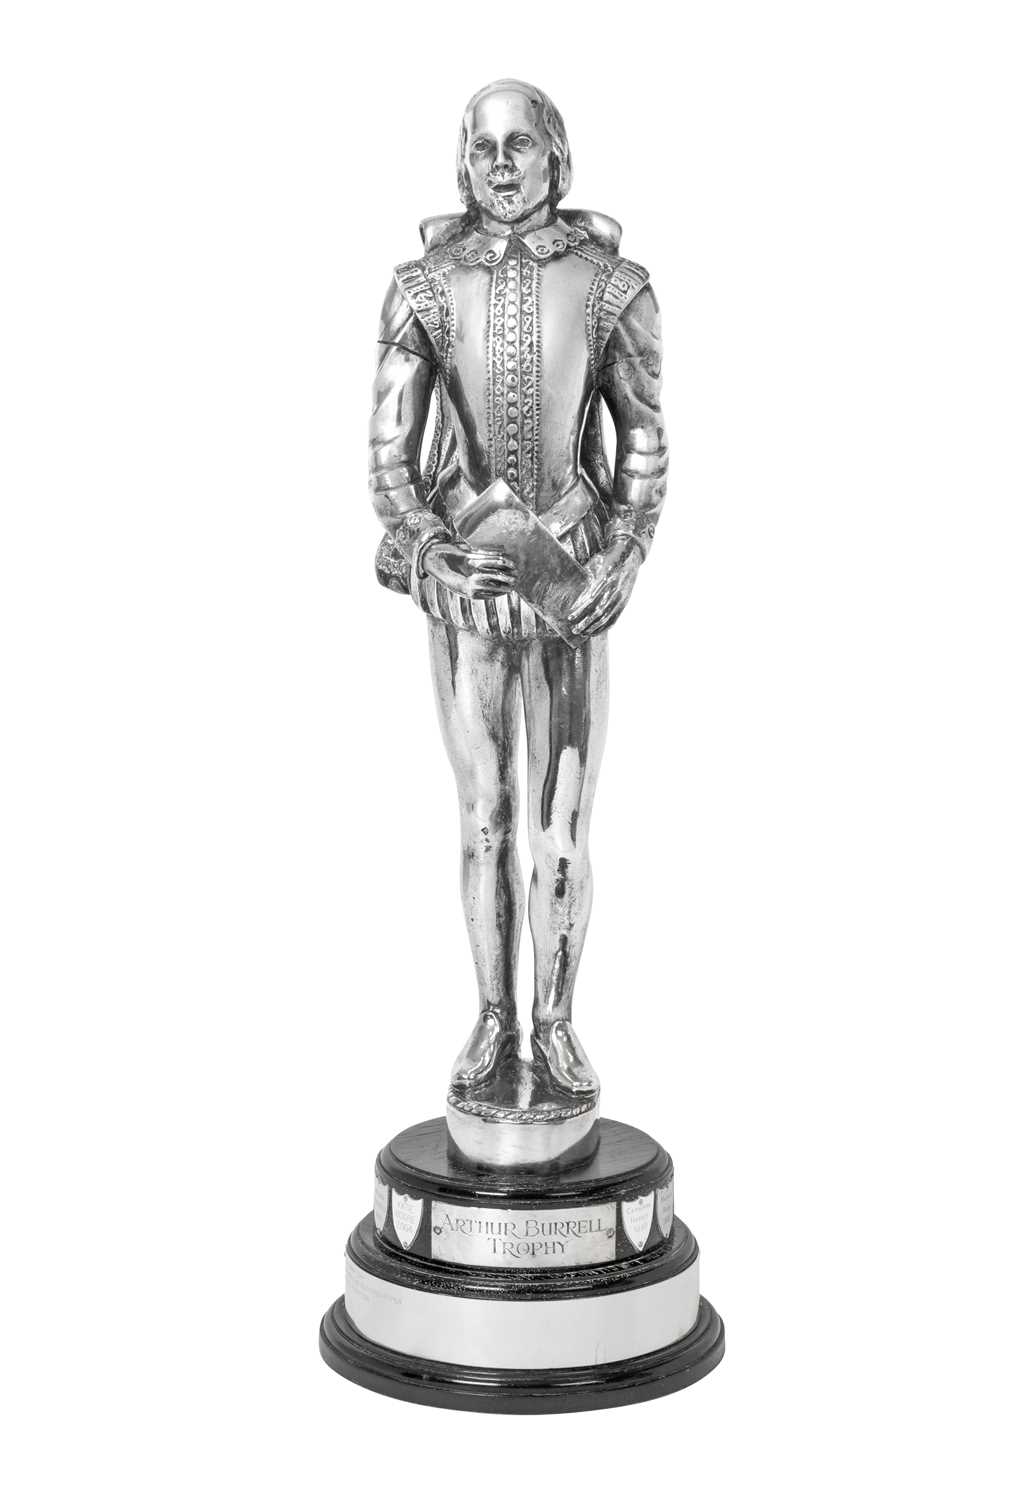 Lot 2298 - The Arthur Burrell Trophy: A George VI Silver Sculpture of William Shakespeare